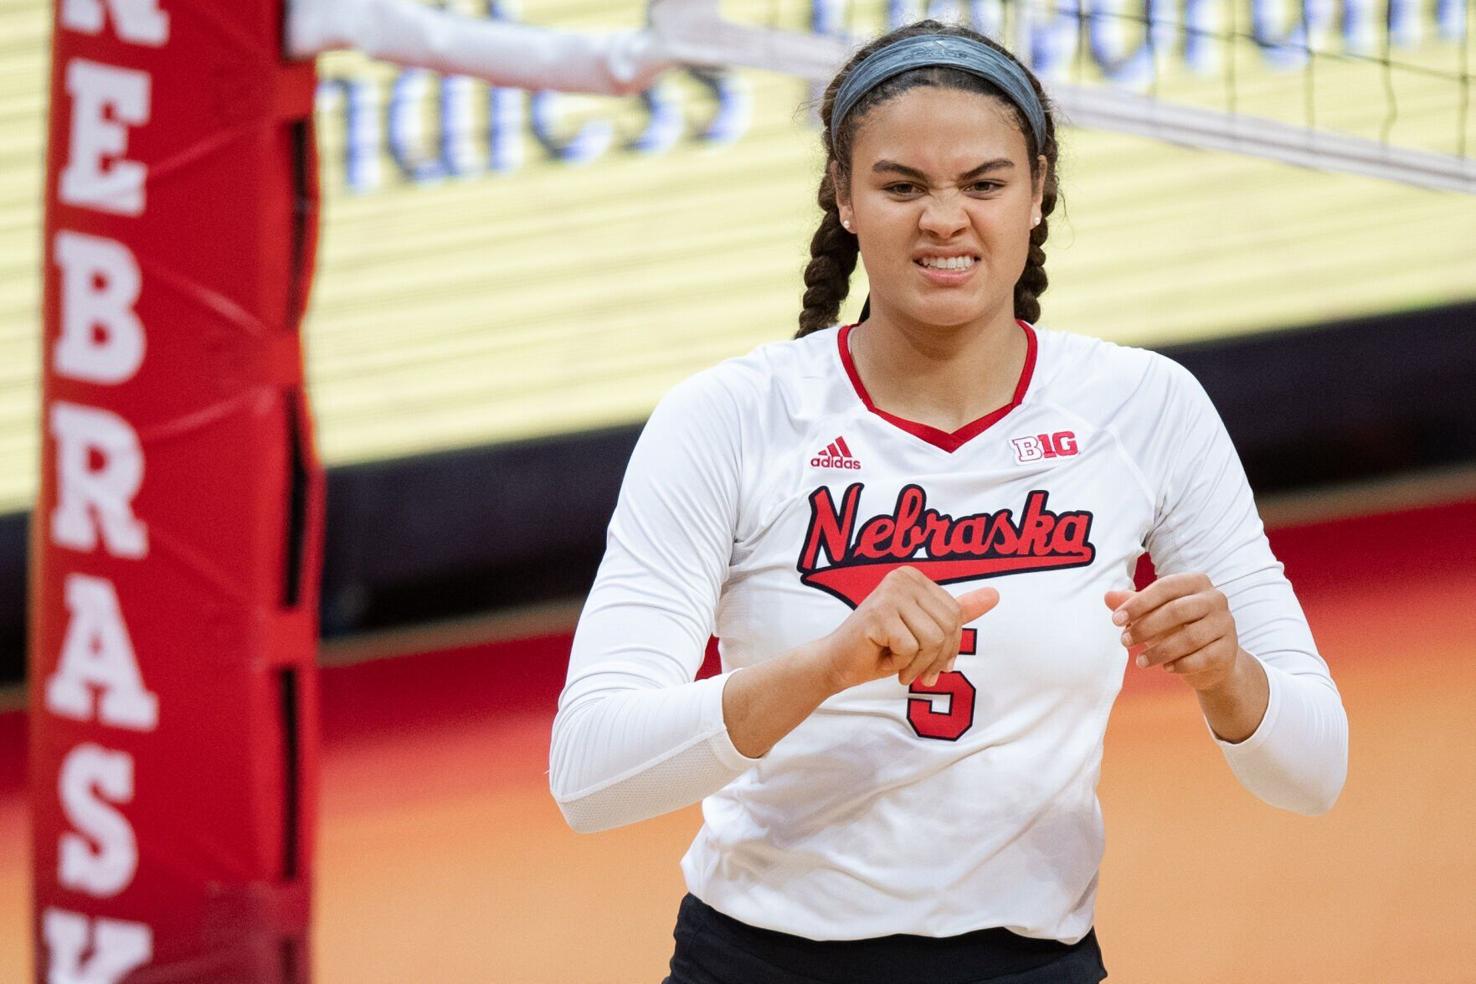 There's nothing timid about Nebraska's Bekka Allick. Just ask her teammates